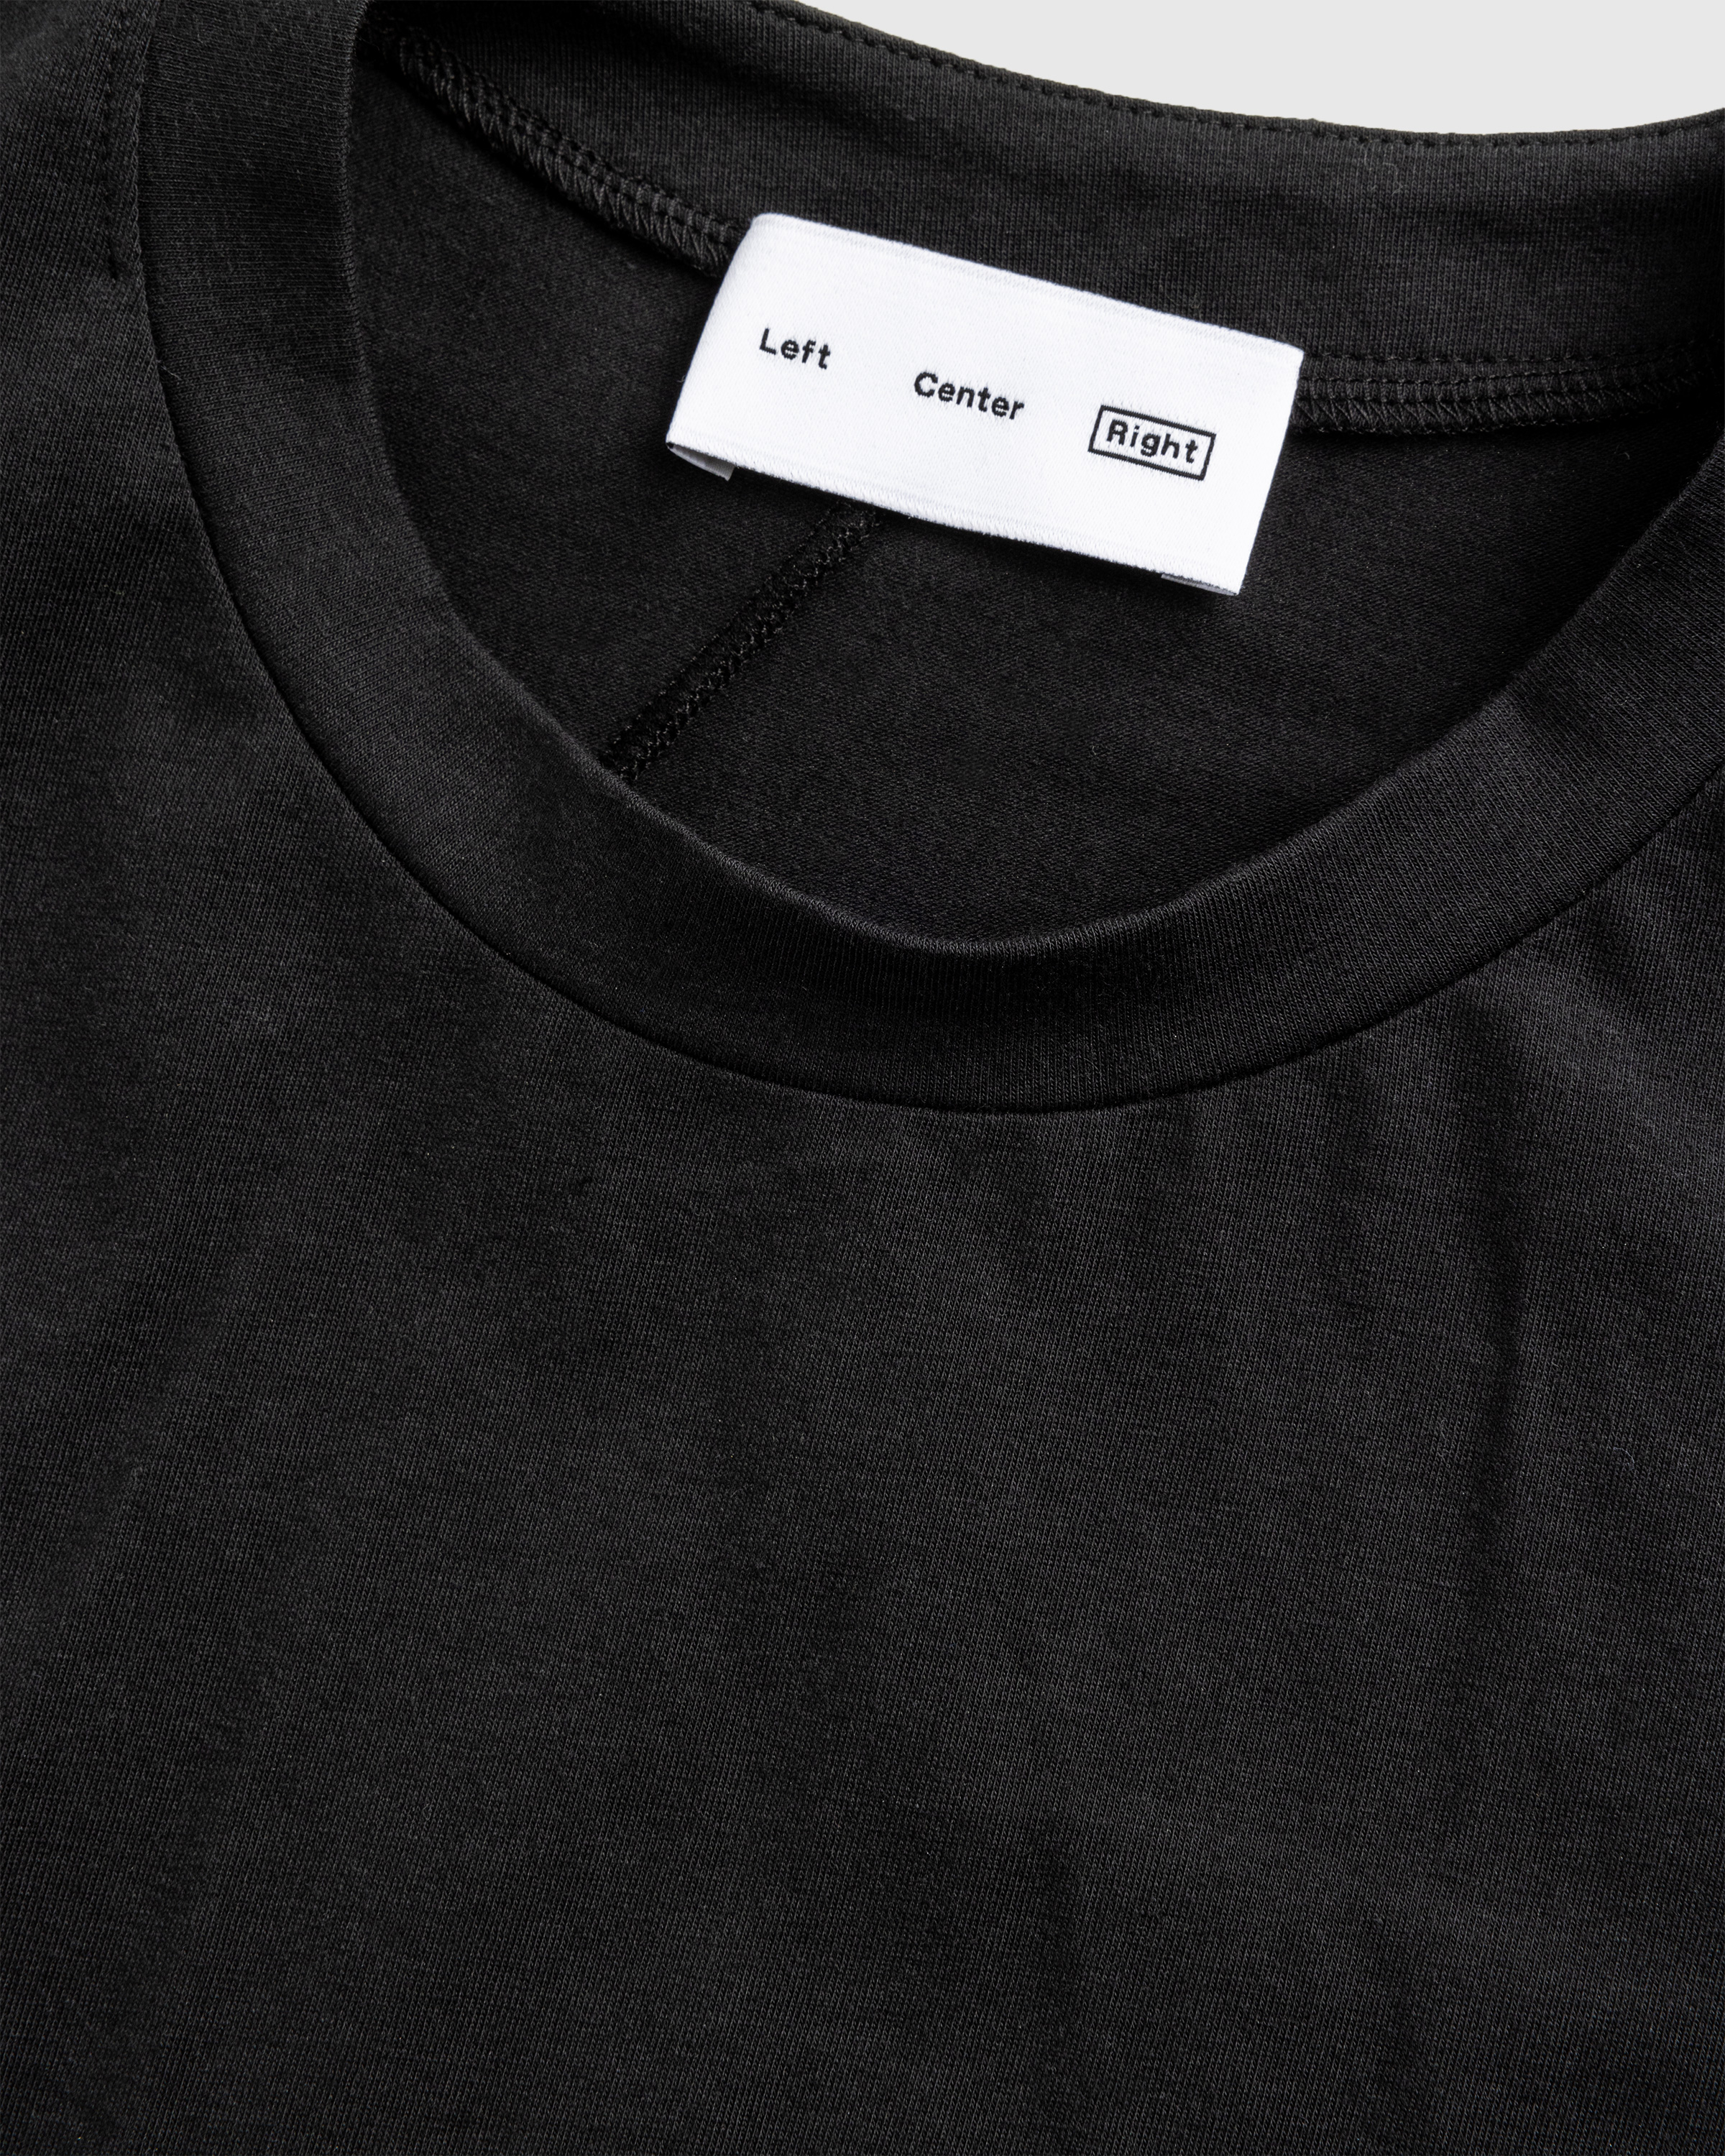 Post Archive Faction (PAF) – 6.0 Tee Right Black - T-Shirts - Black - Image 7